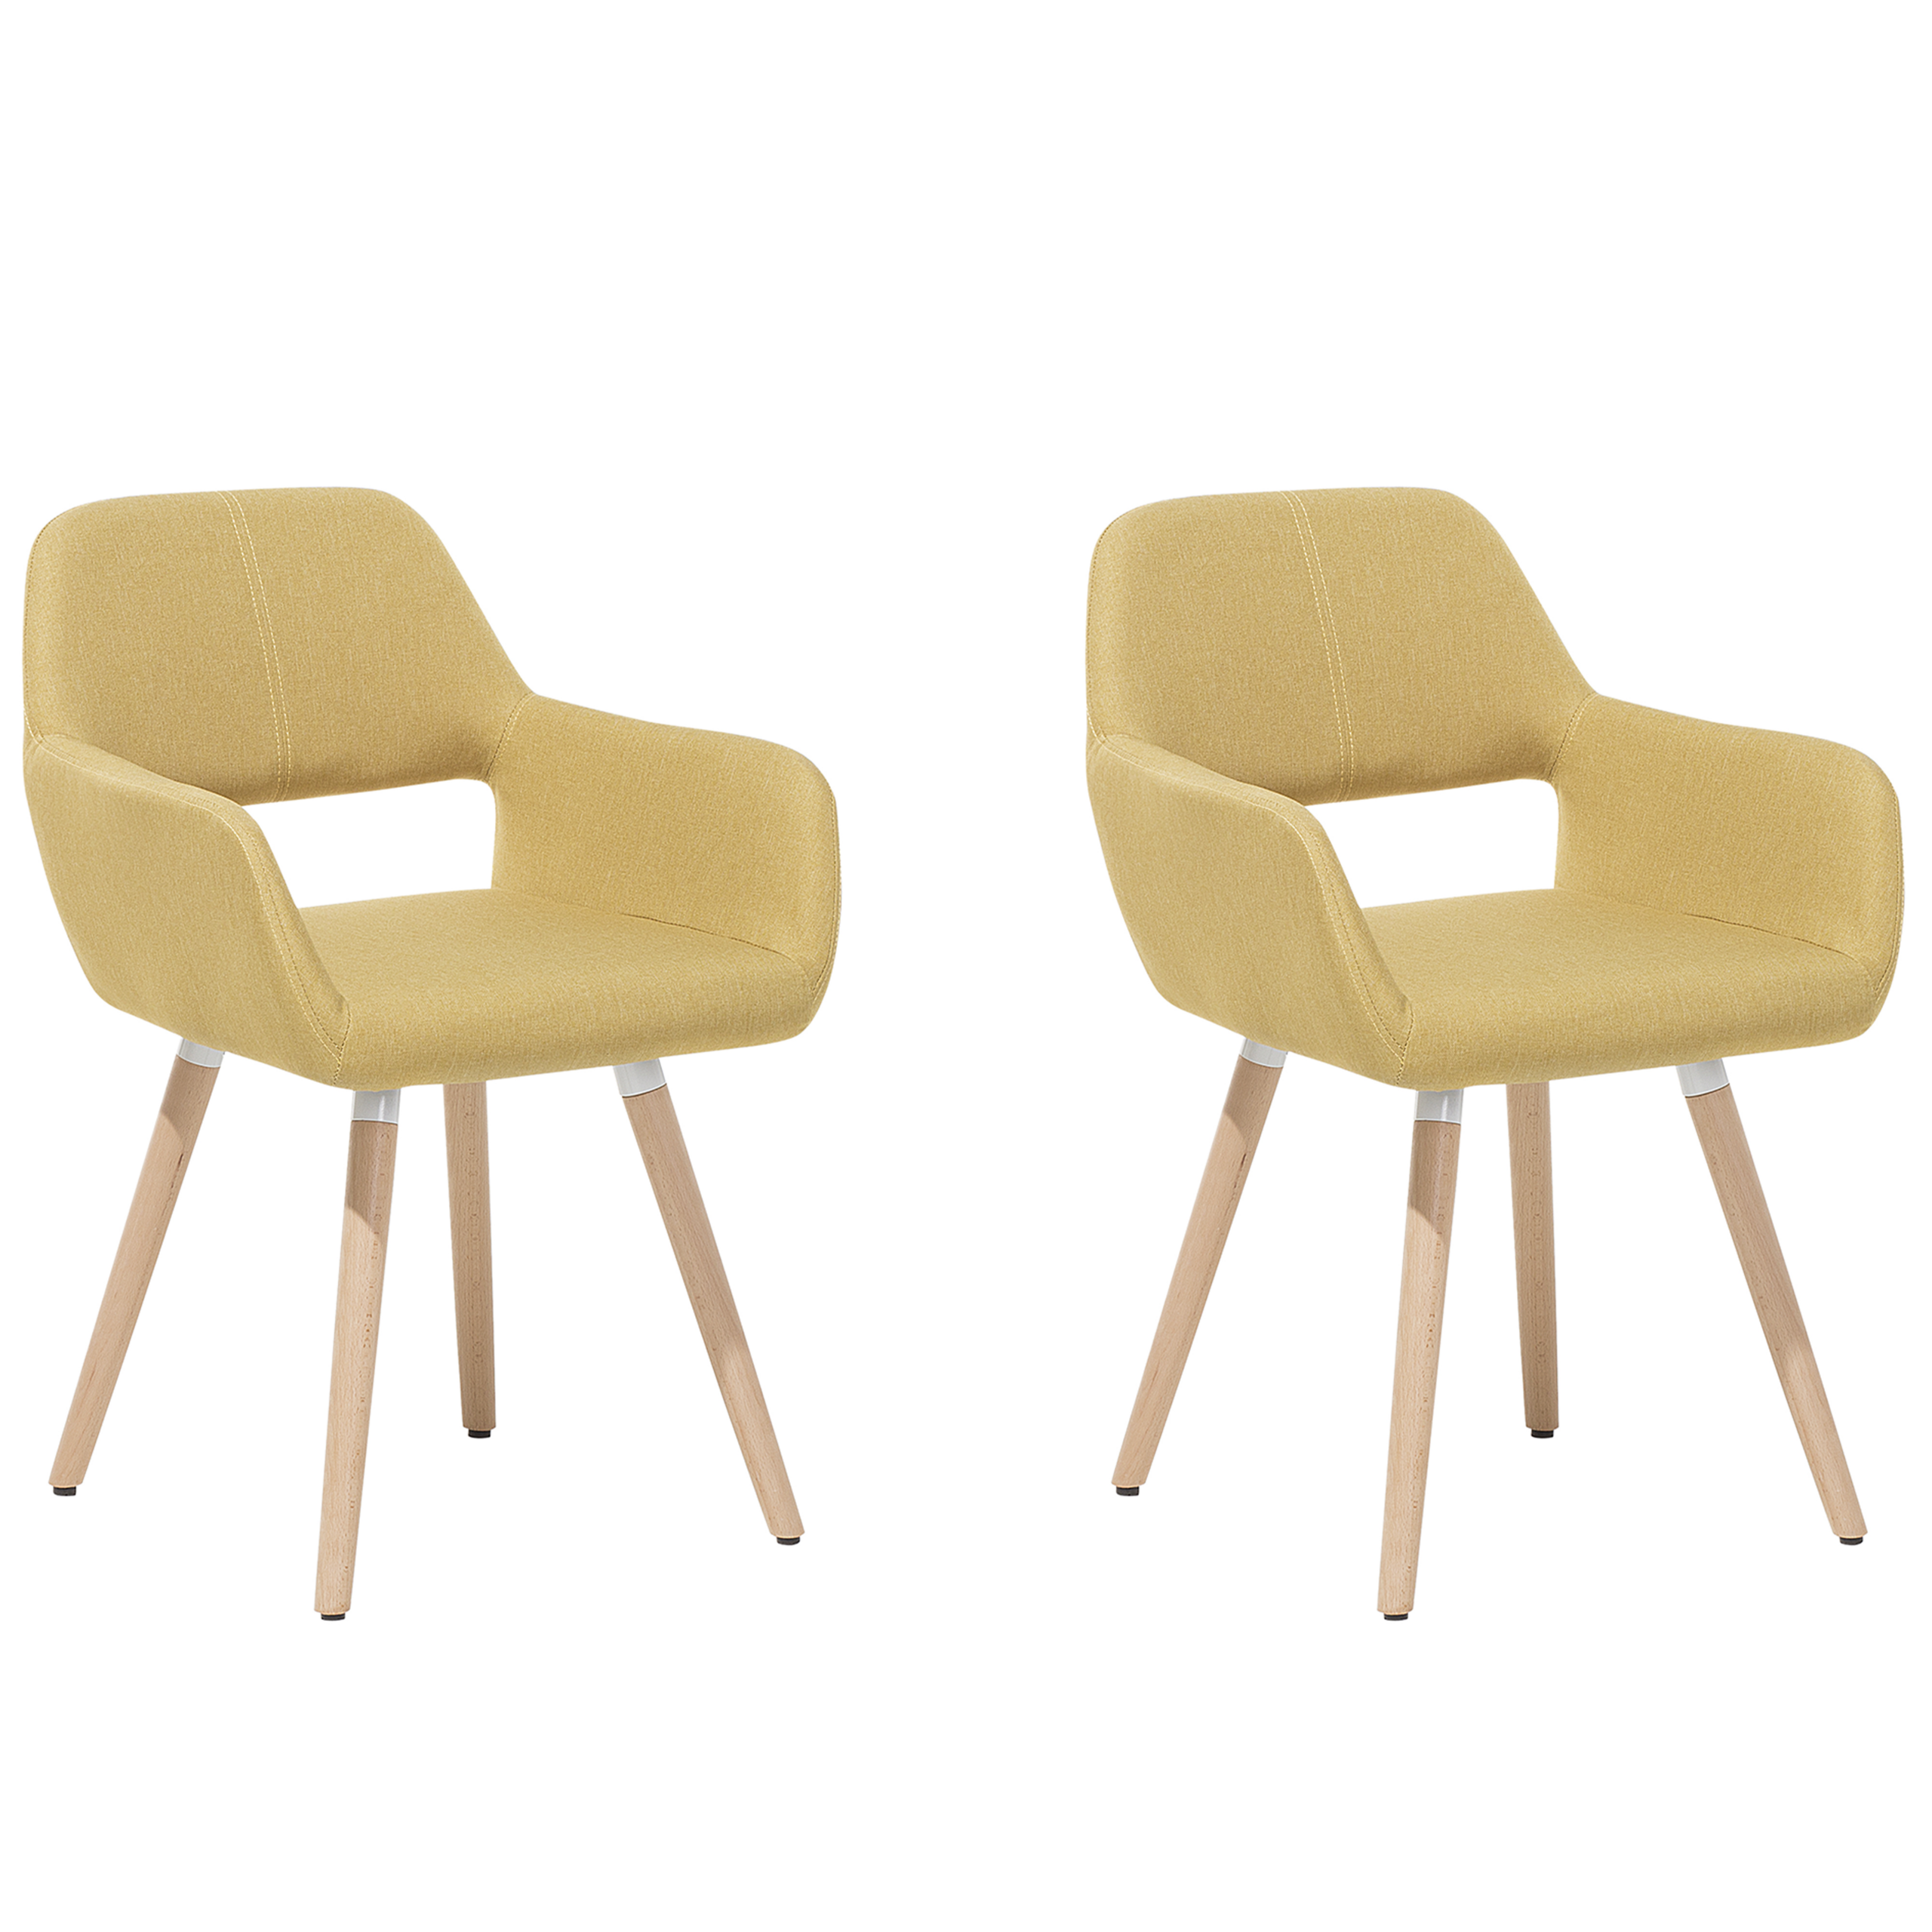 Beliani Set of 2 Dining Chairs Yellow Fabric Upholstery Light Wood Legs Modern Eclectic Style